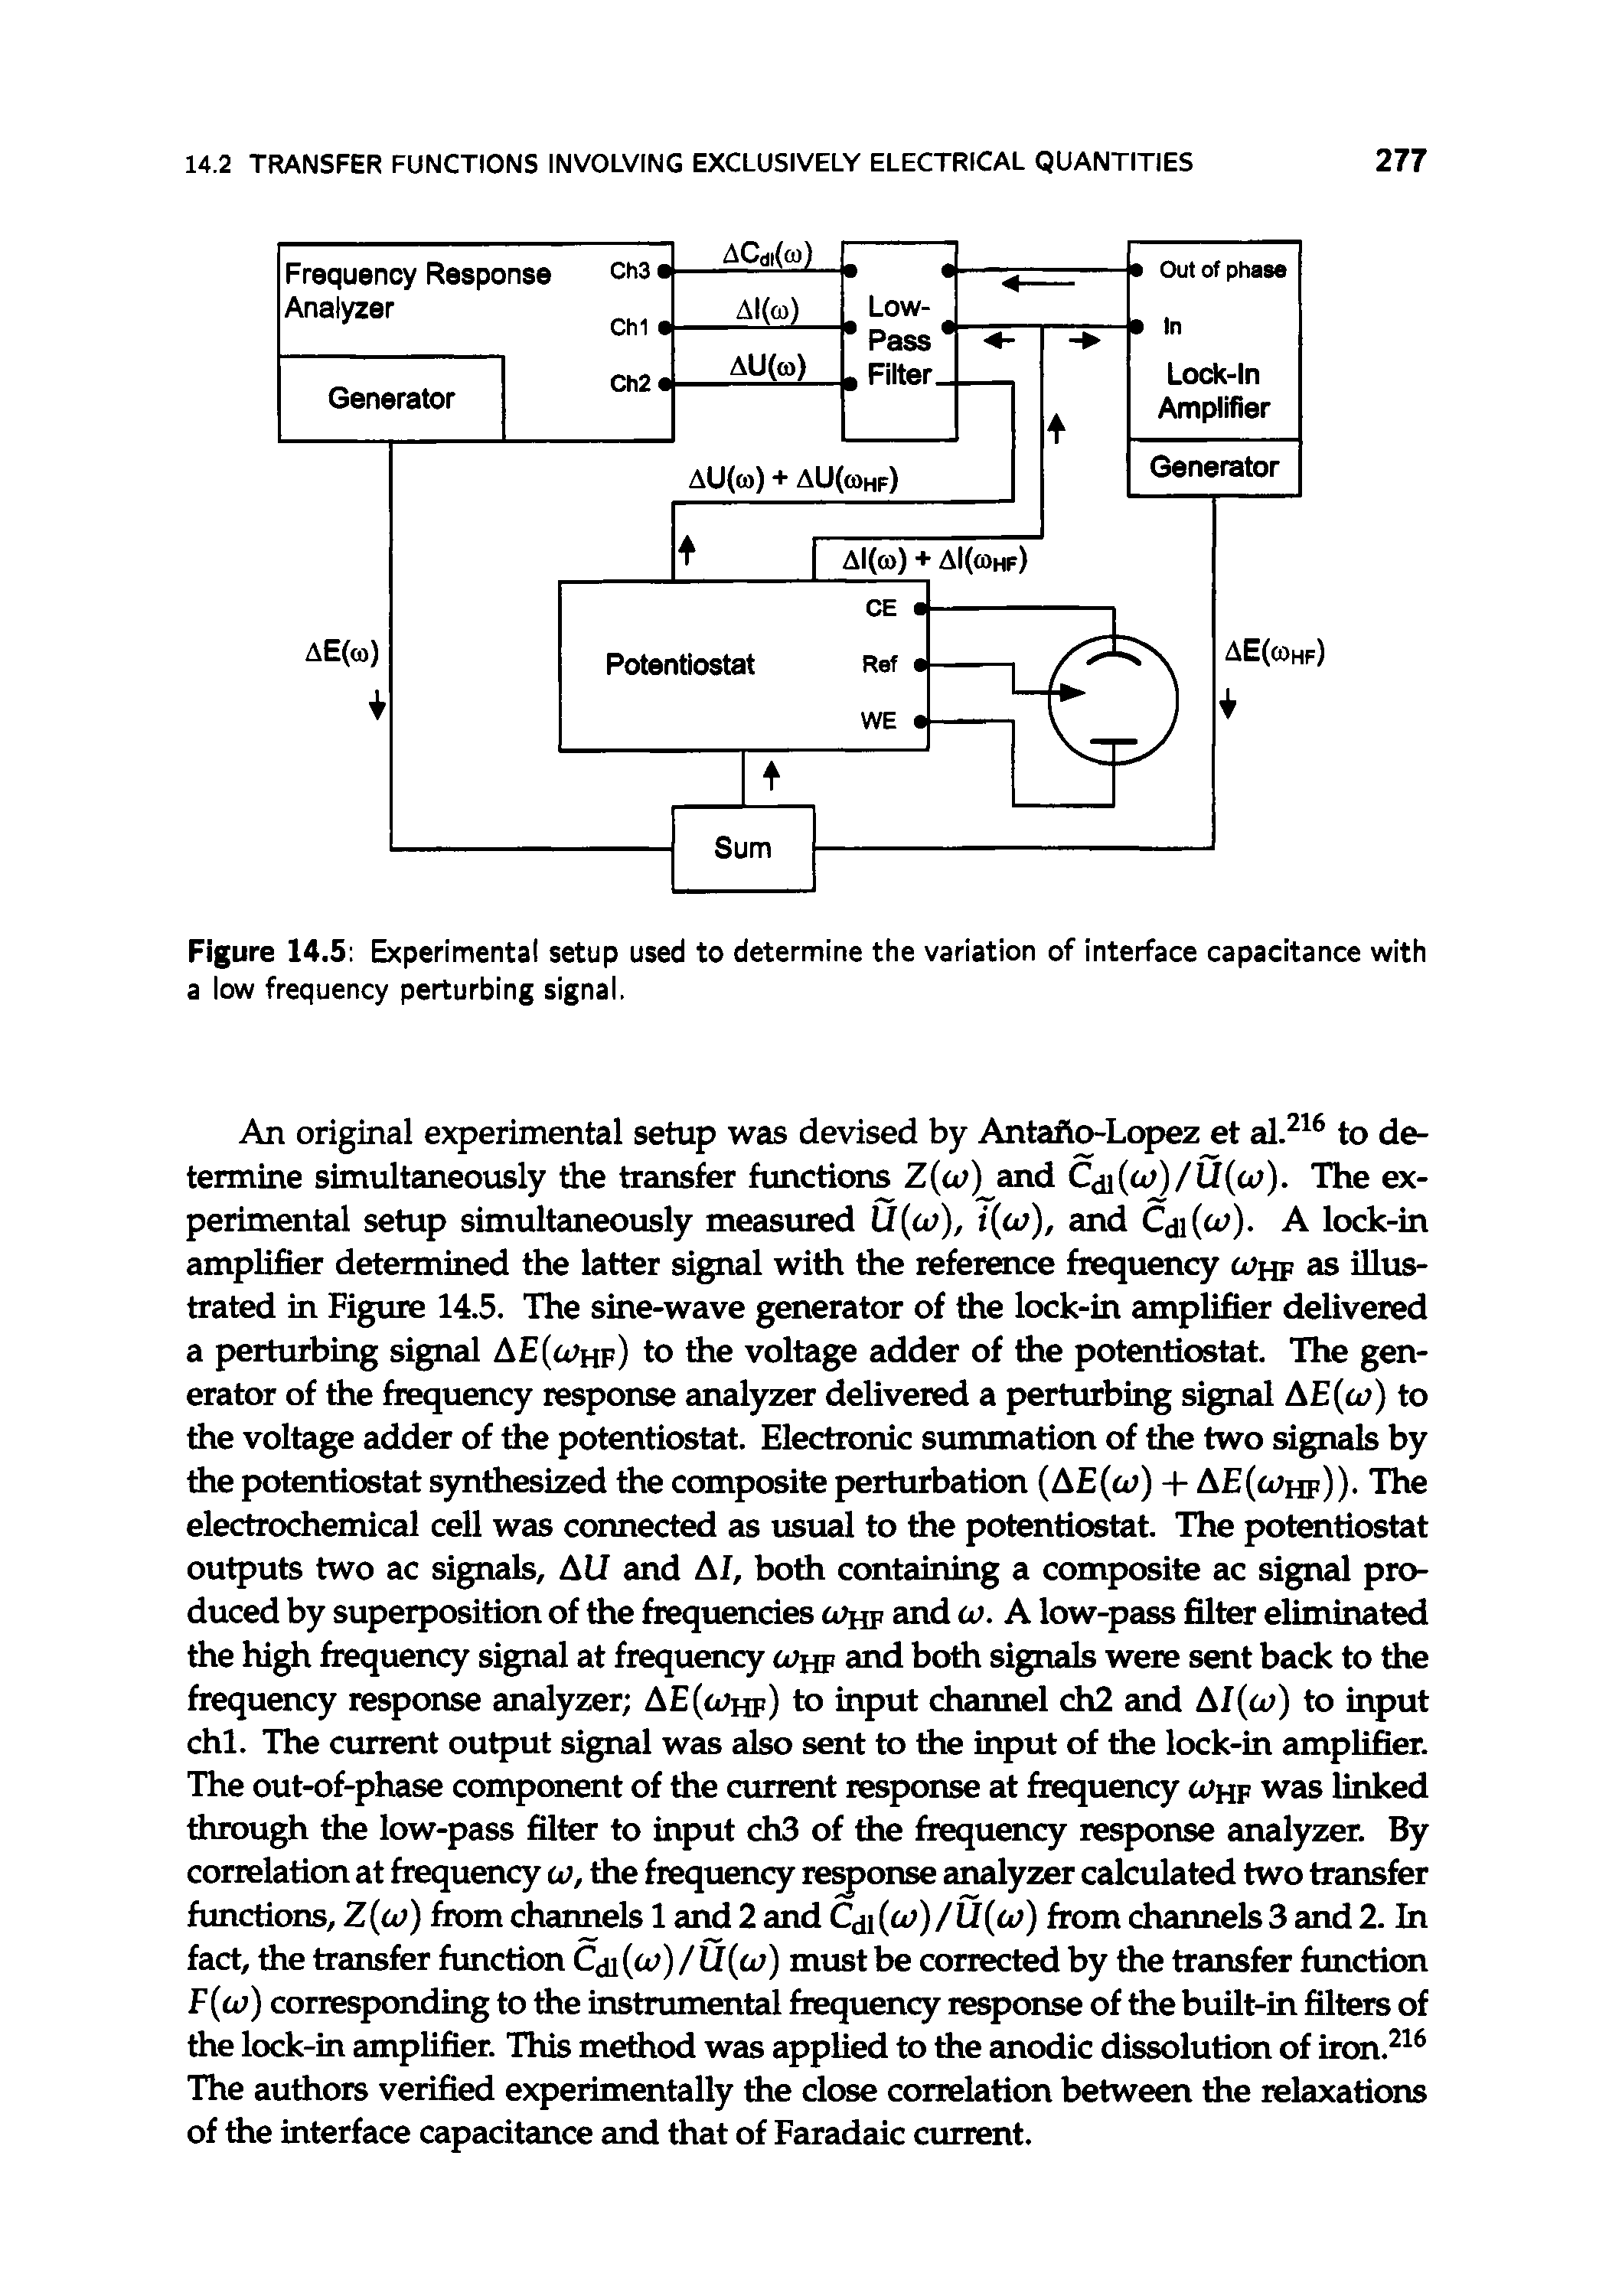 Figure 14.5 Experimental setup used to determine the variation of interface capacitance with a low frequency perturbing signal.